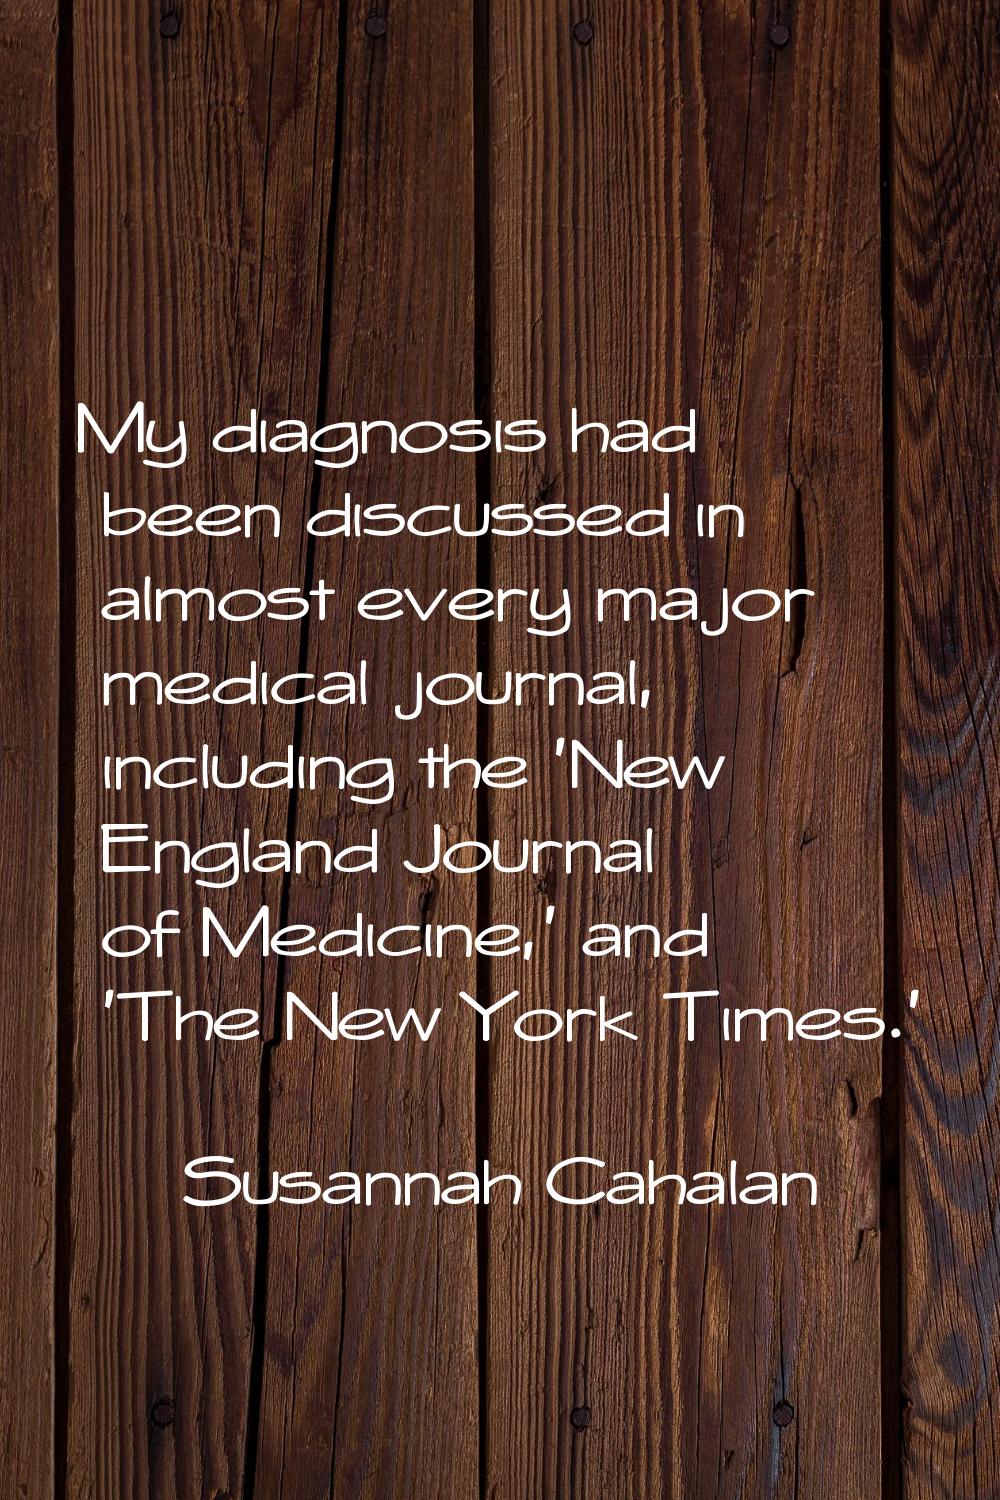 My diagnosis had been discussed in almost every major medical journal, including the 'New England J